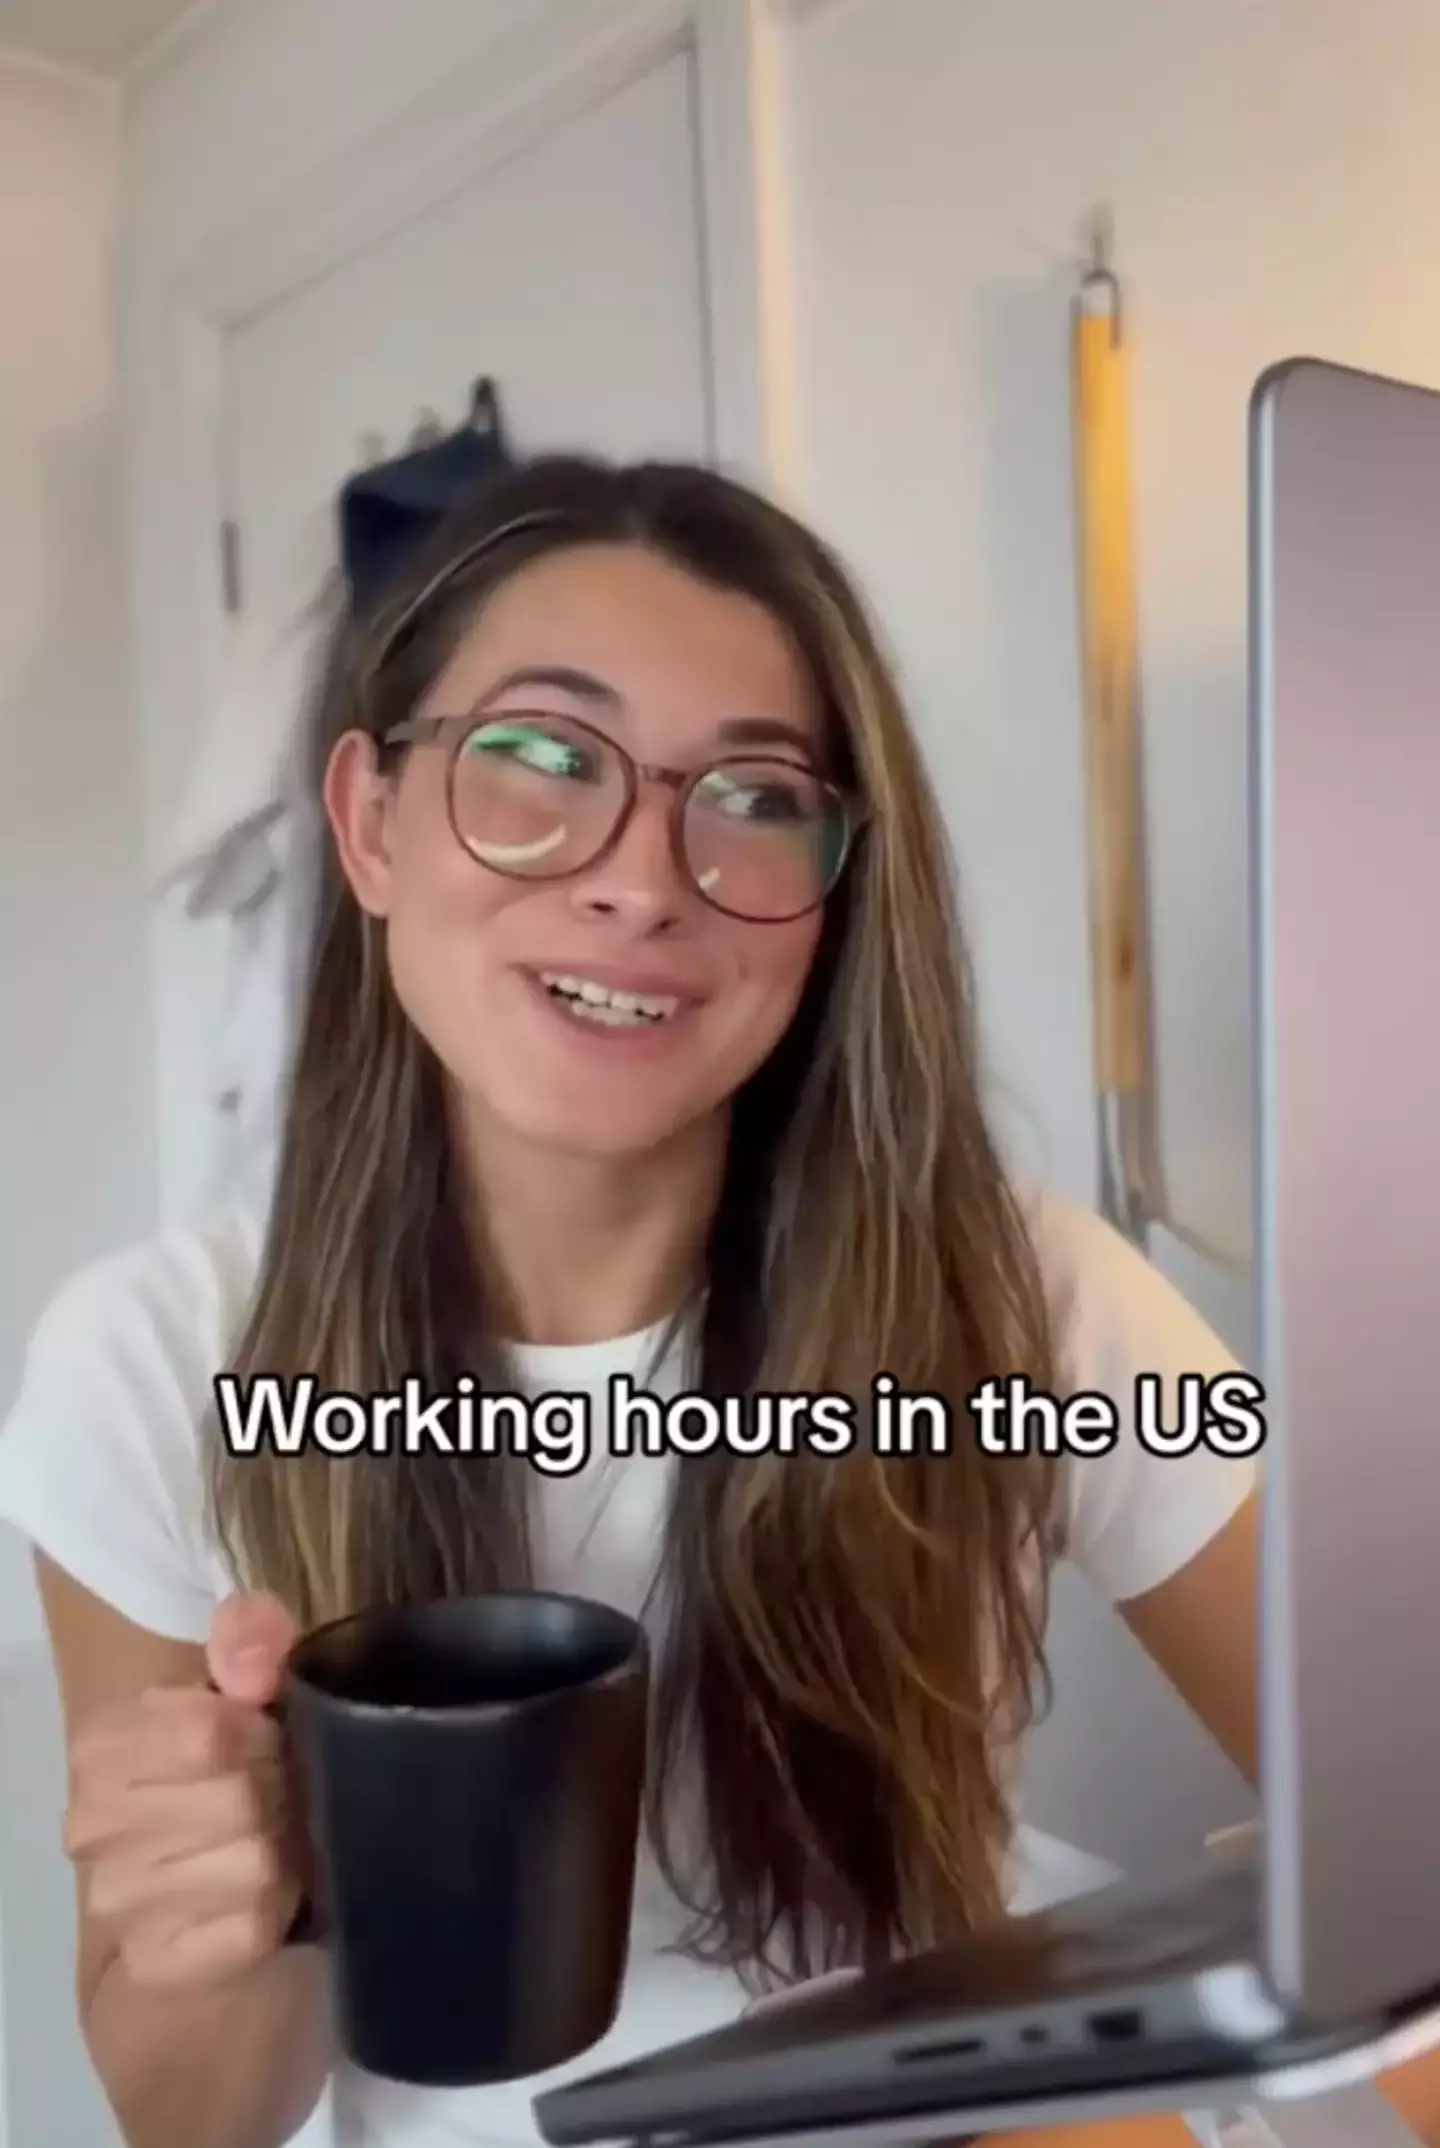 The TikToker revealed the drastic difference between annual leave in the UK and the US.